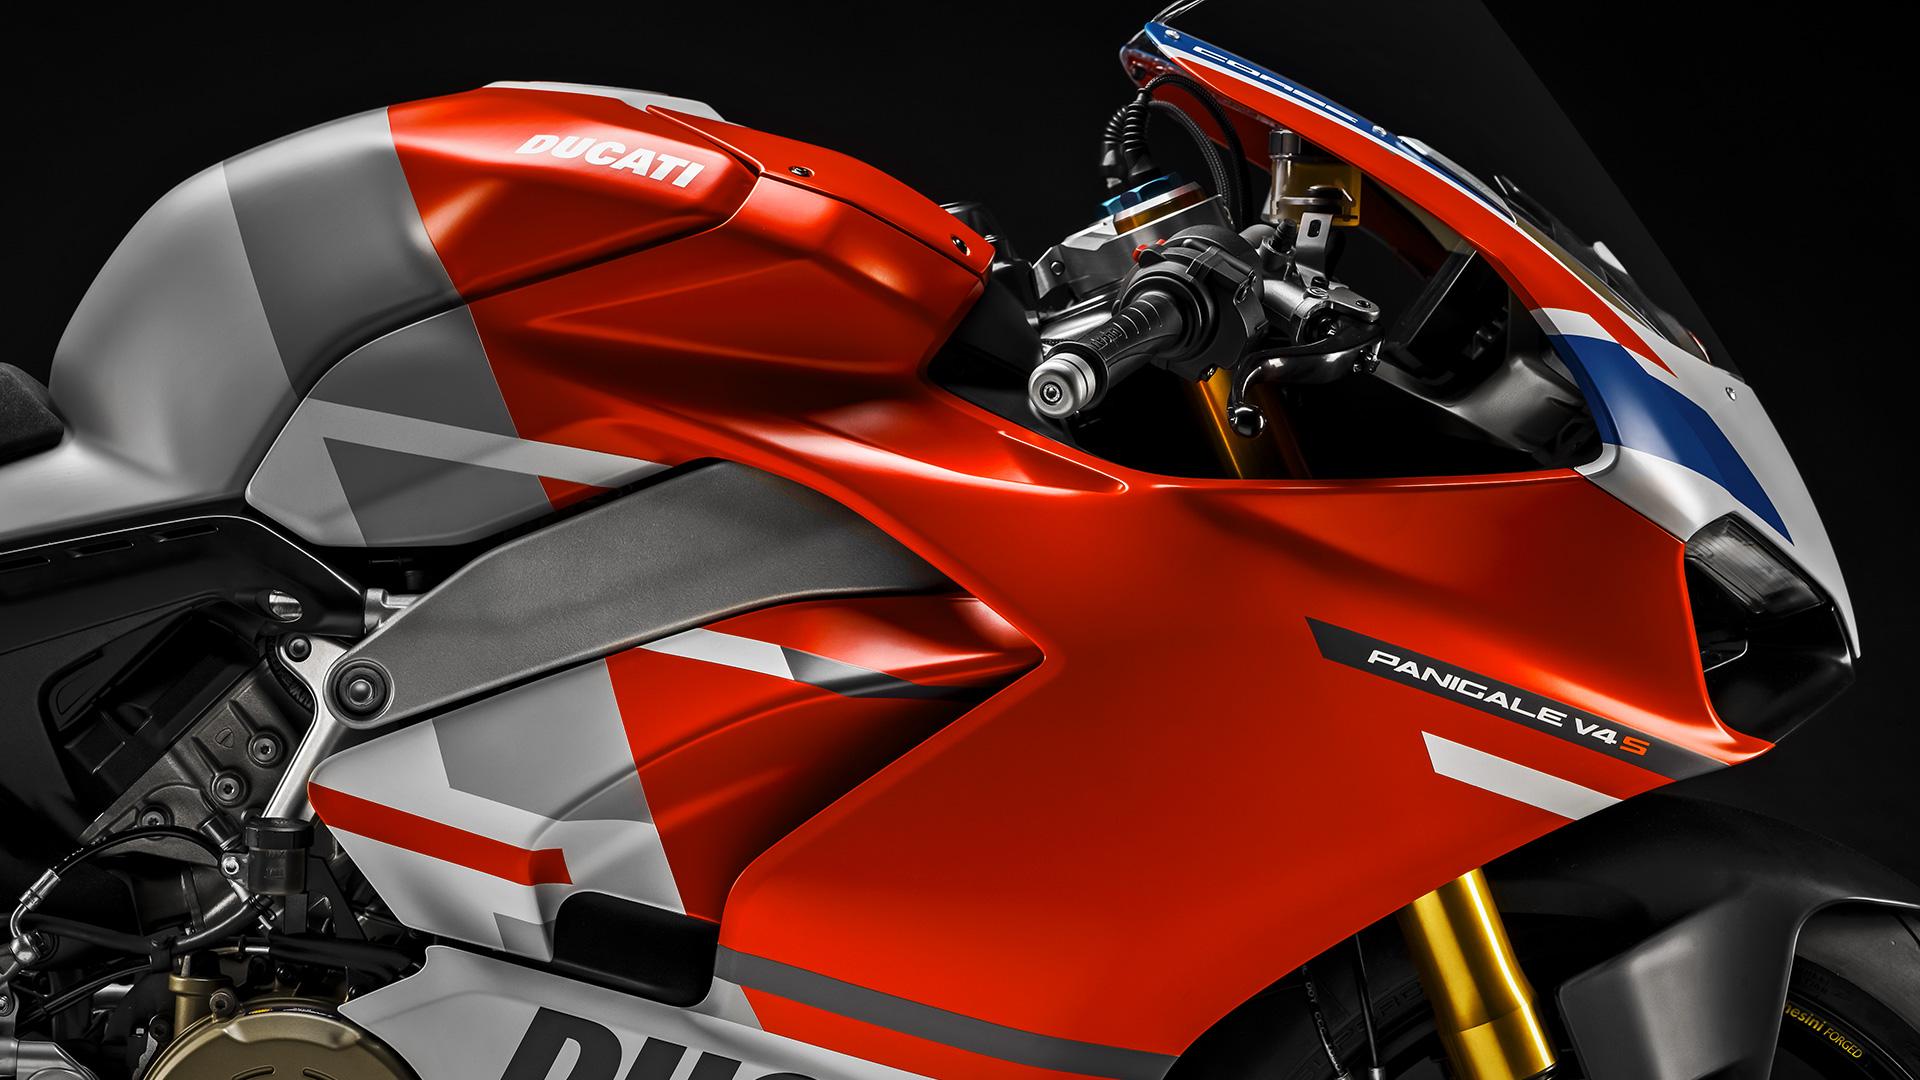 Ducati Panigale V4R Wallpapers - Wallpaper Cave